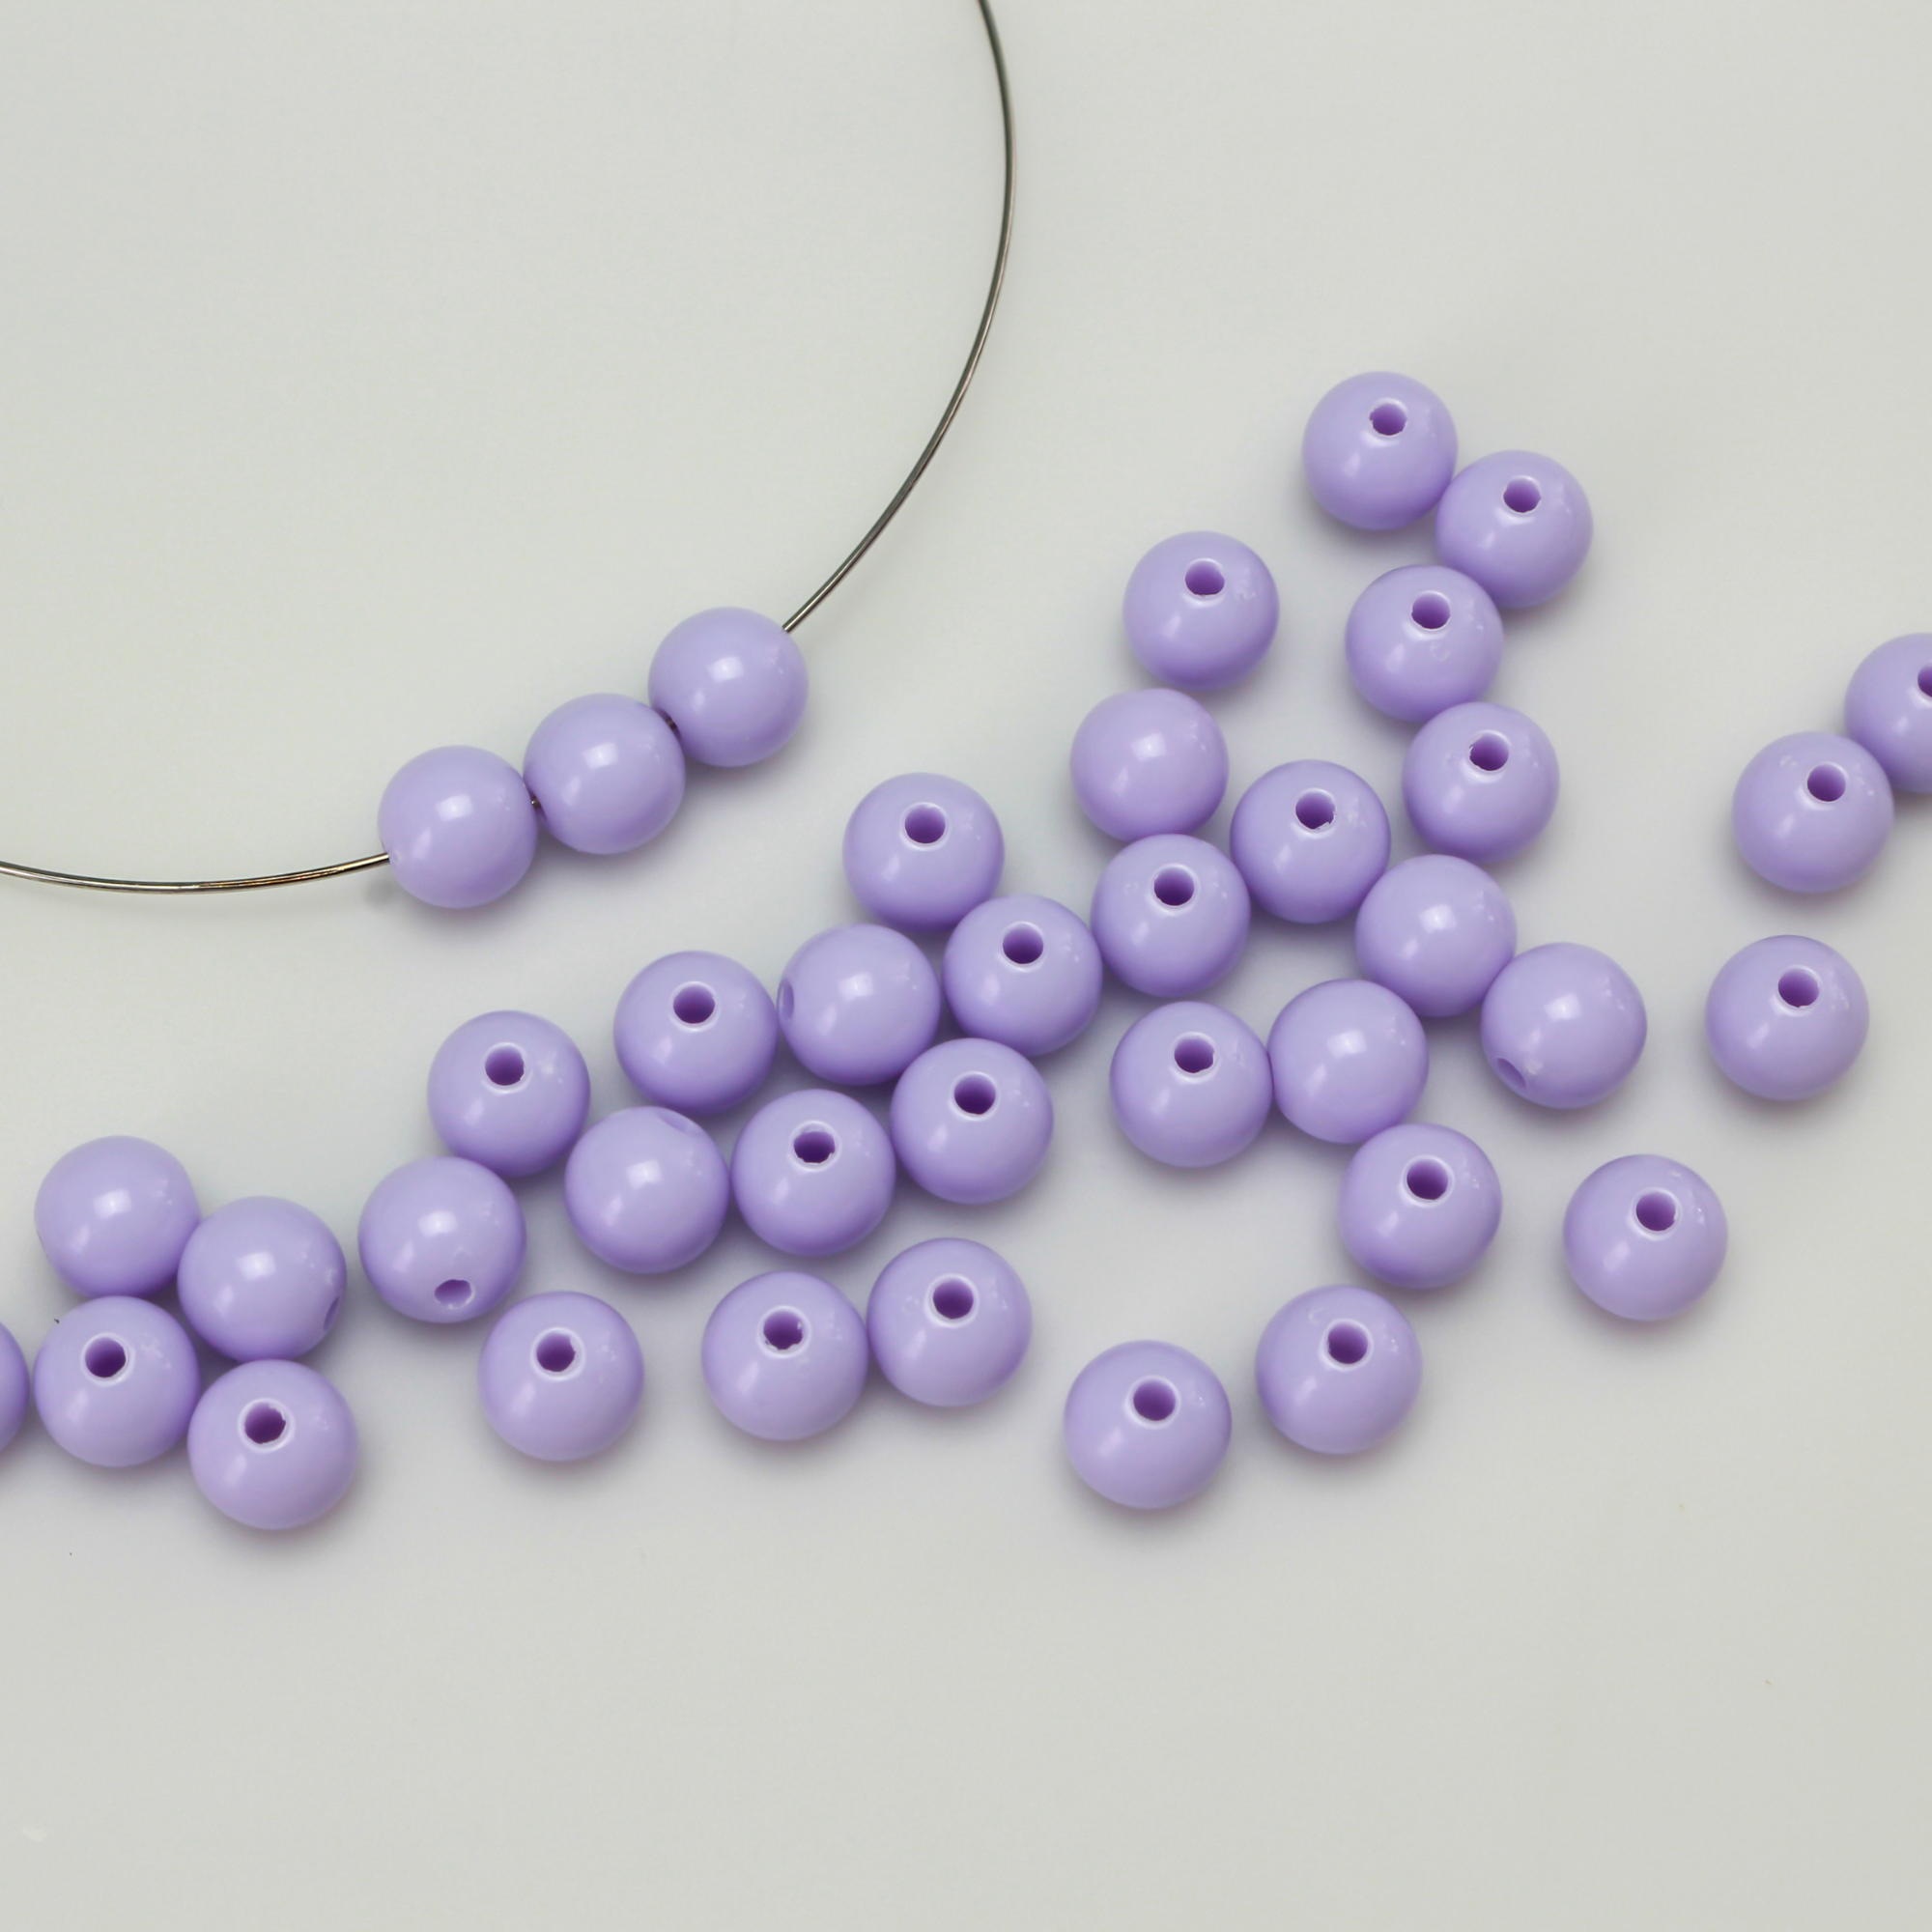 Round pale purple opaque beads that are 8mm in diameter with a 1.5mm hole size. 